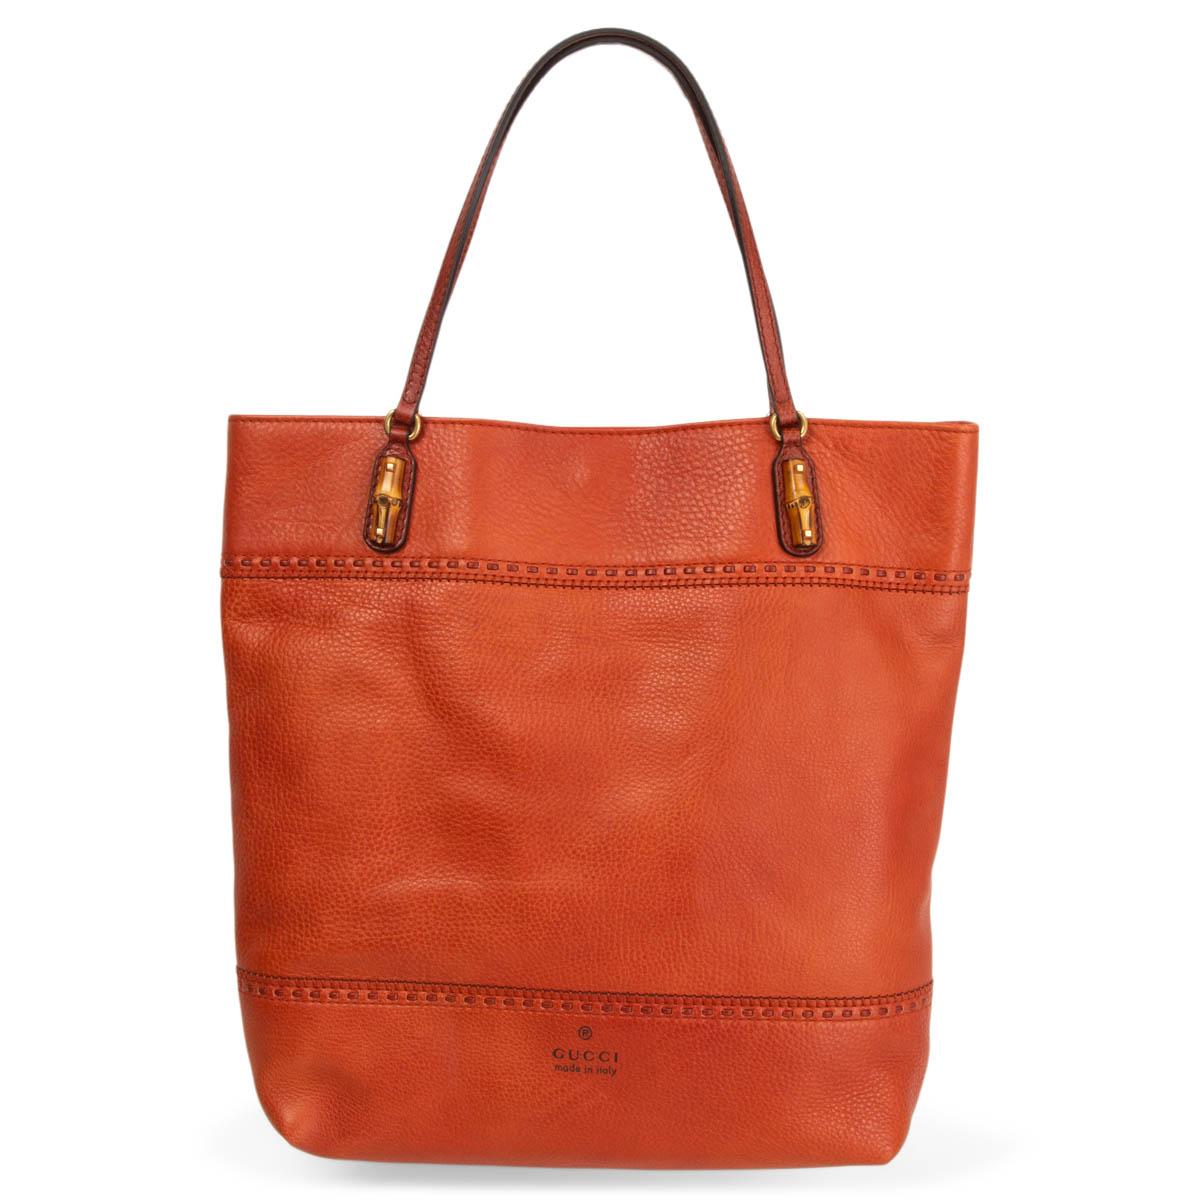 red leather tote